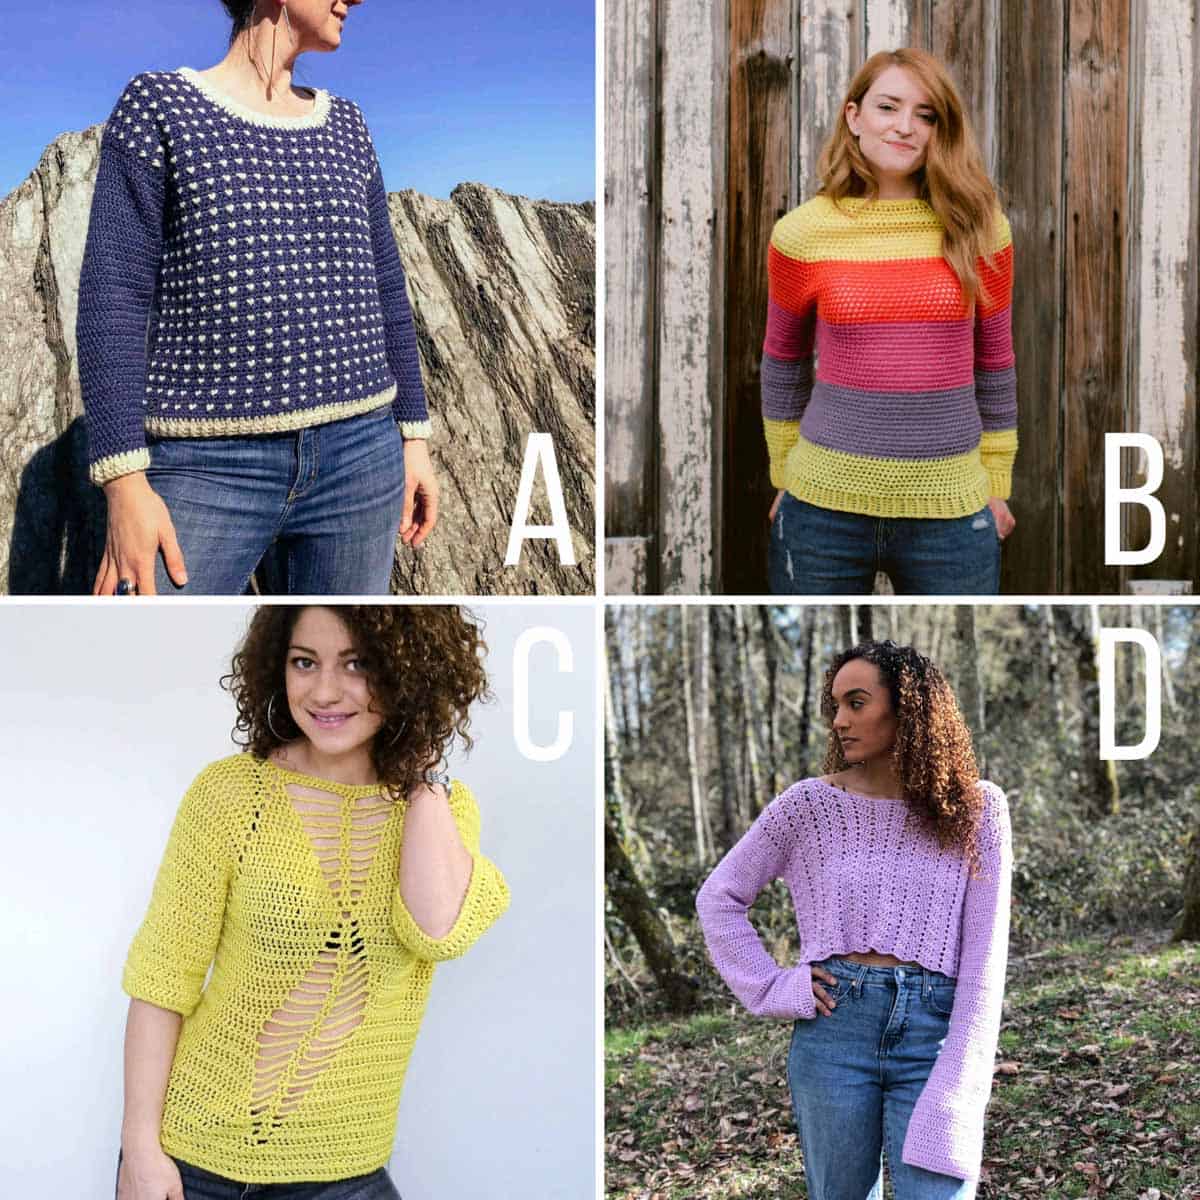 Grid of four free crochet sweater patterns. One is a crochet pullover sweater, one is a striped crochet sweater, one is an openwork crochet blouse and one is a cropped crochet sweater with bell sleeves.